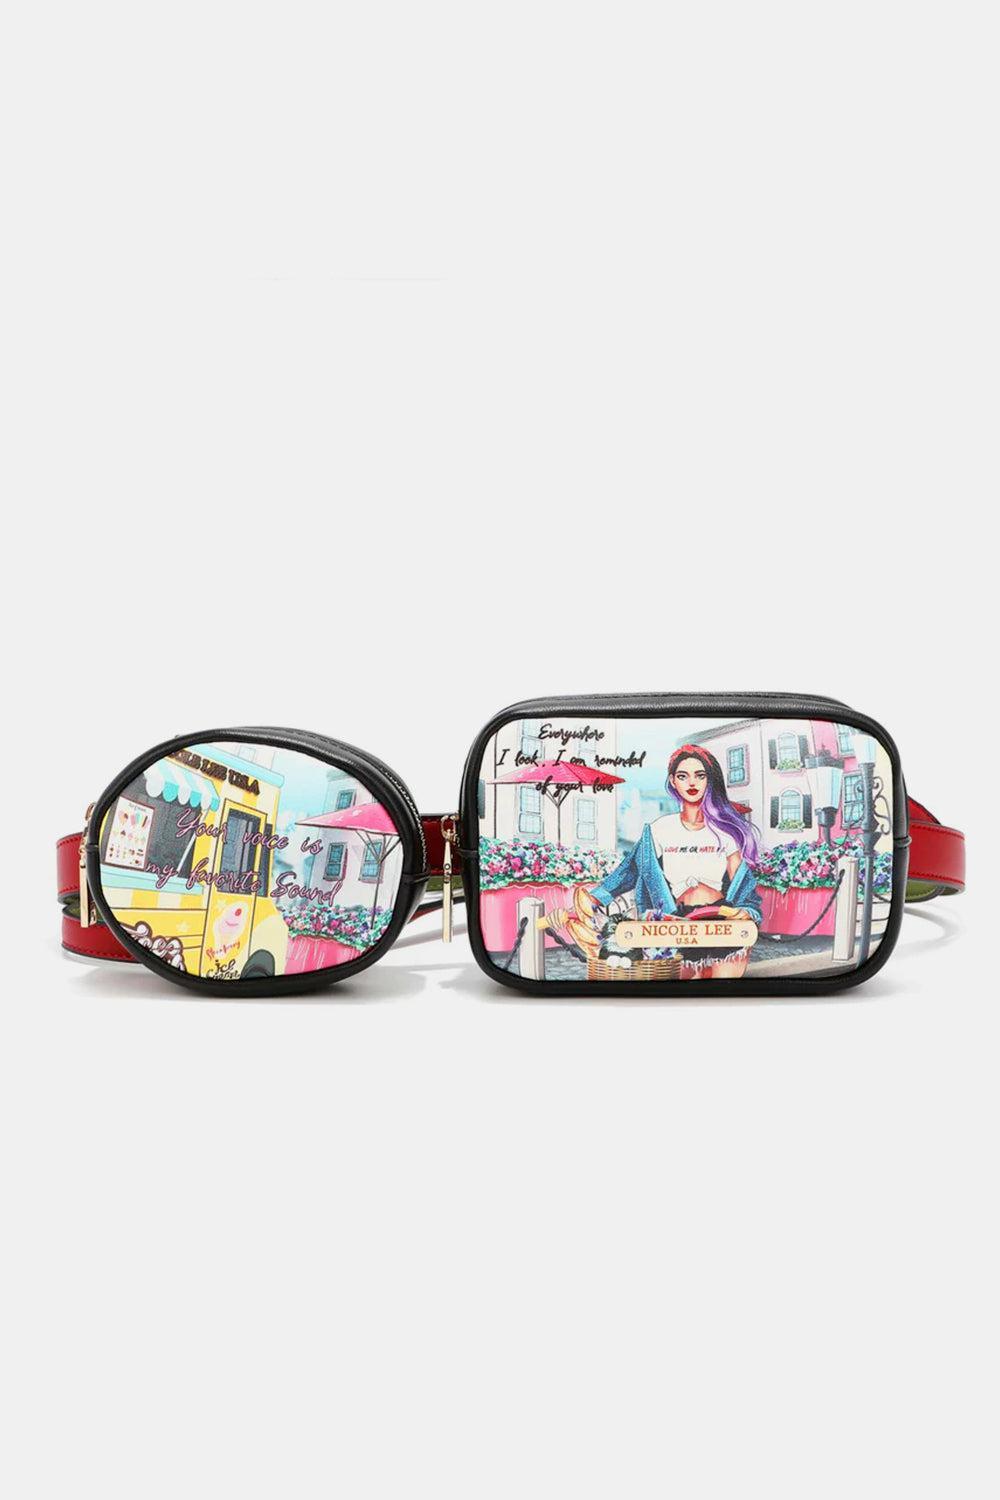 a pair of glasses with a picture of a woman on it